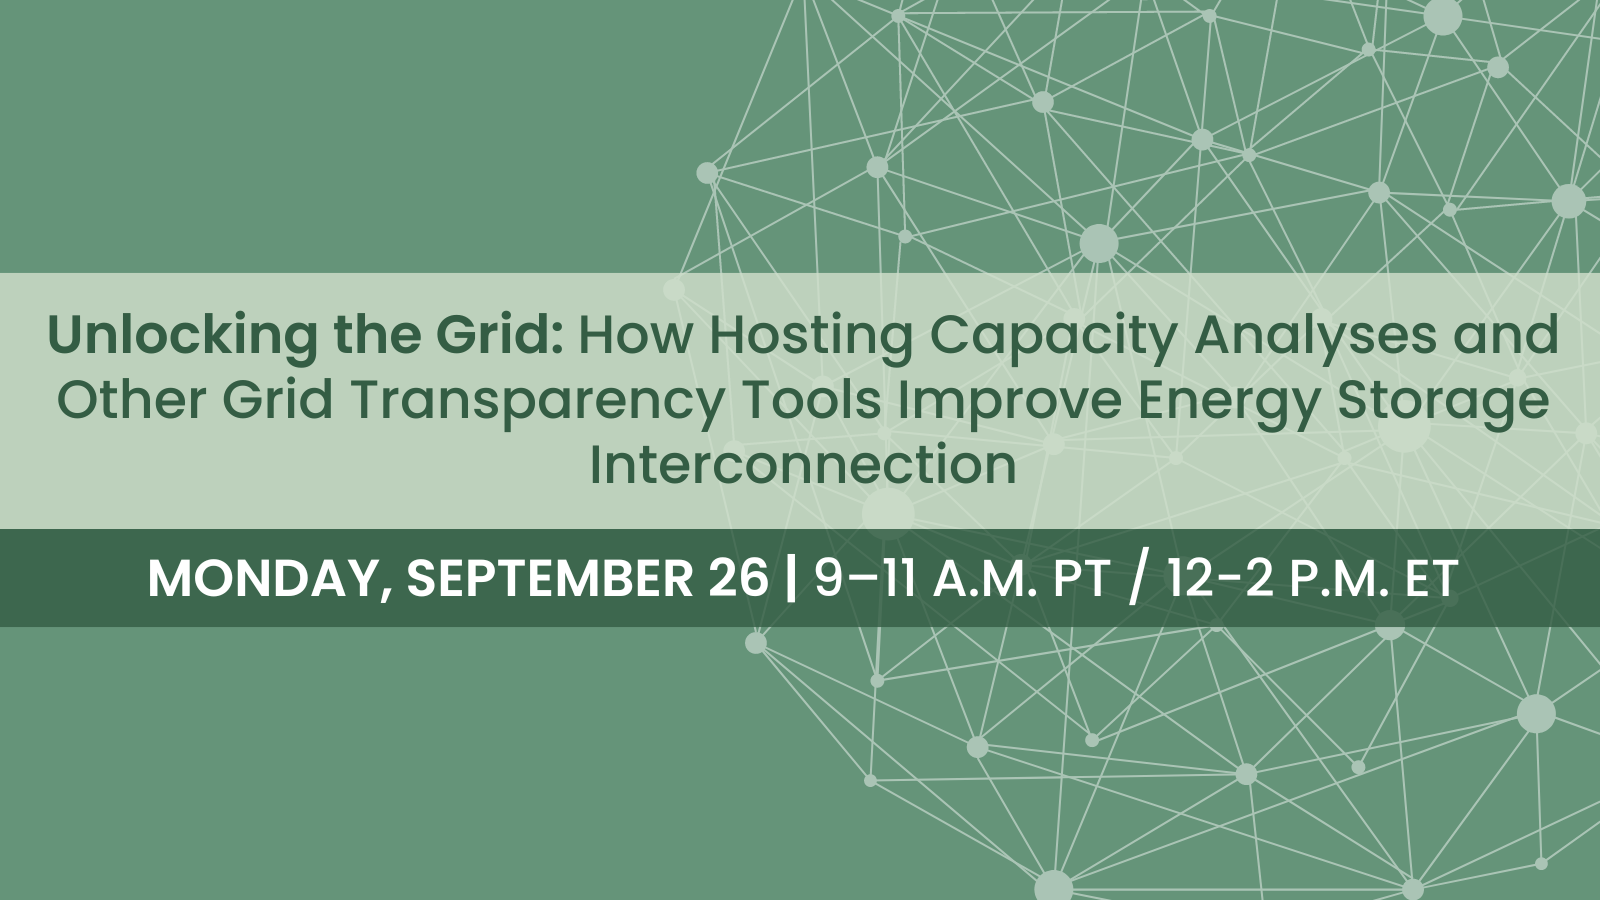 Unlocking the Grid: How Hosting Capacity Analyses & Other Grid Transparency Tools Improve Energy Storage Interconnection Training